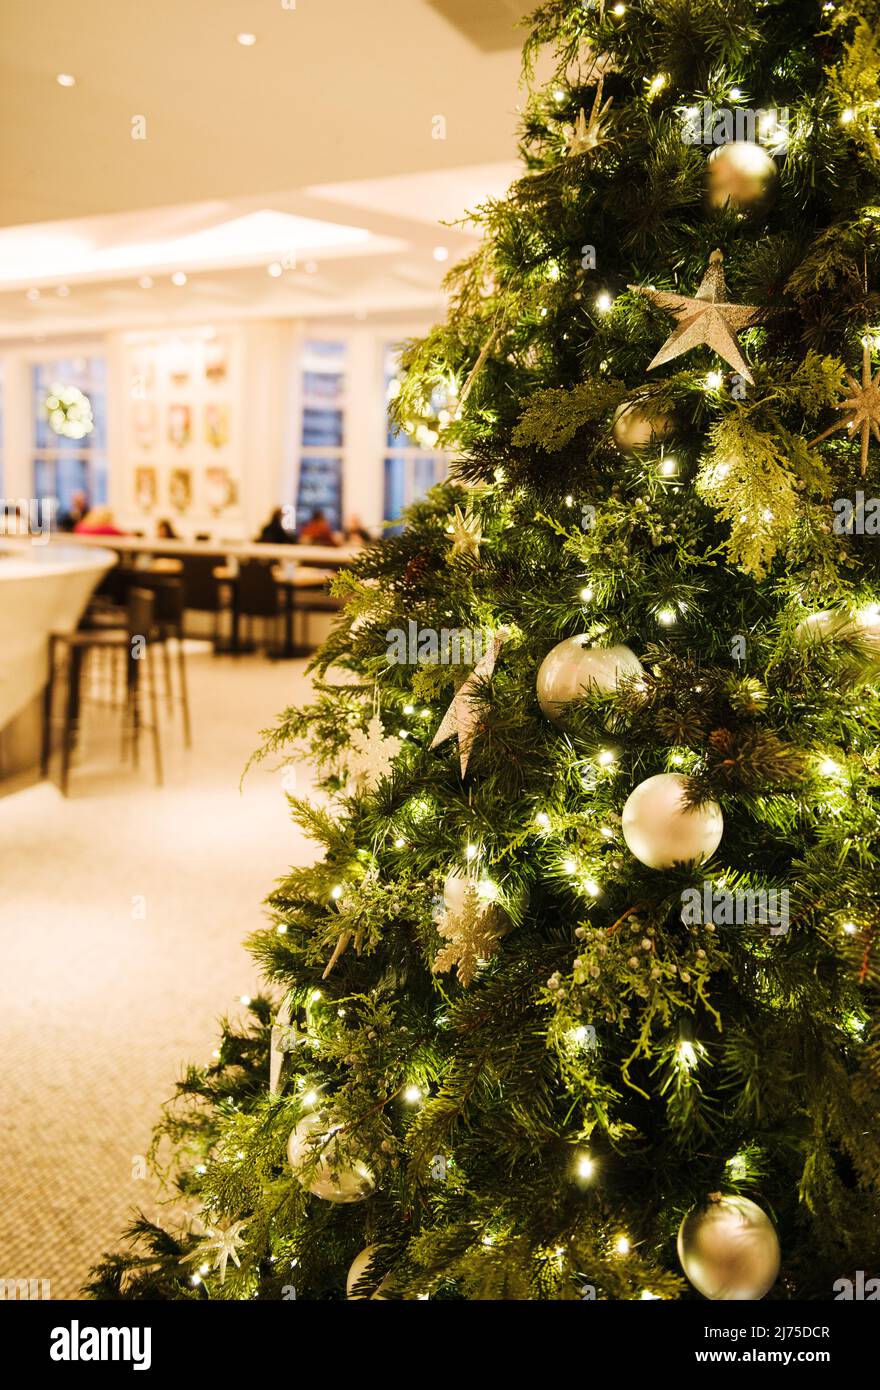 Restaurant interior decorated at christmas time Stock Photo